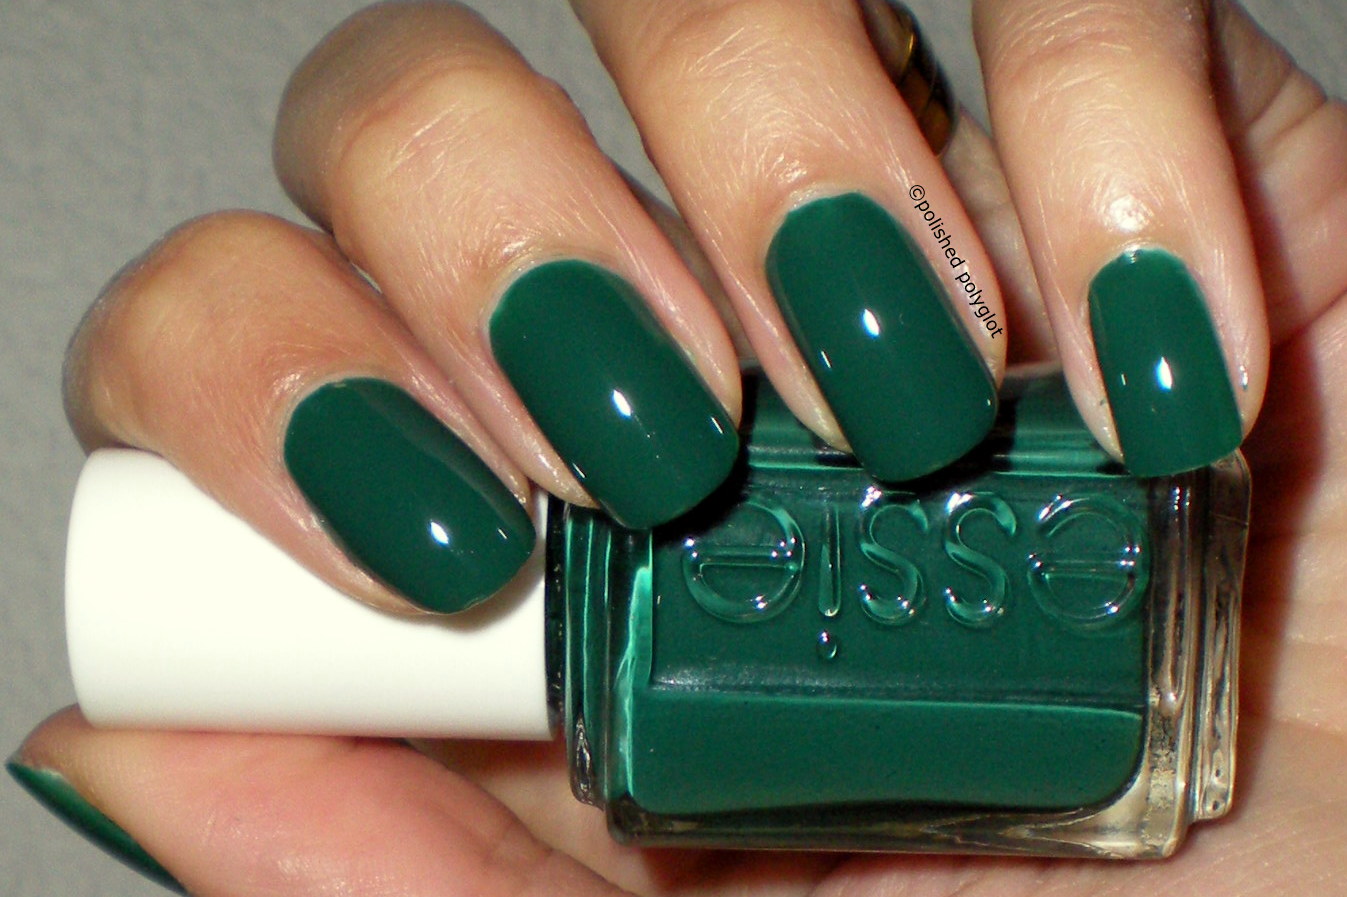 2. Essie Green Nail Color - wide 3